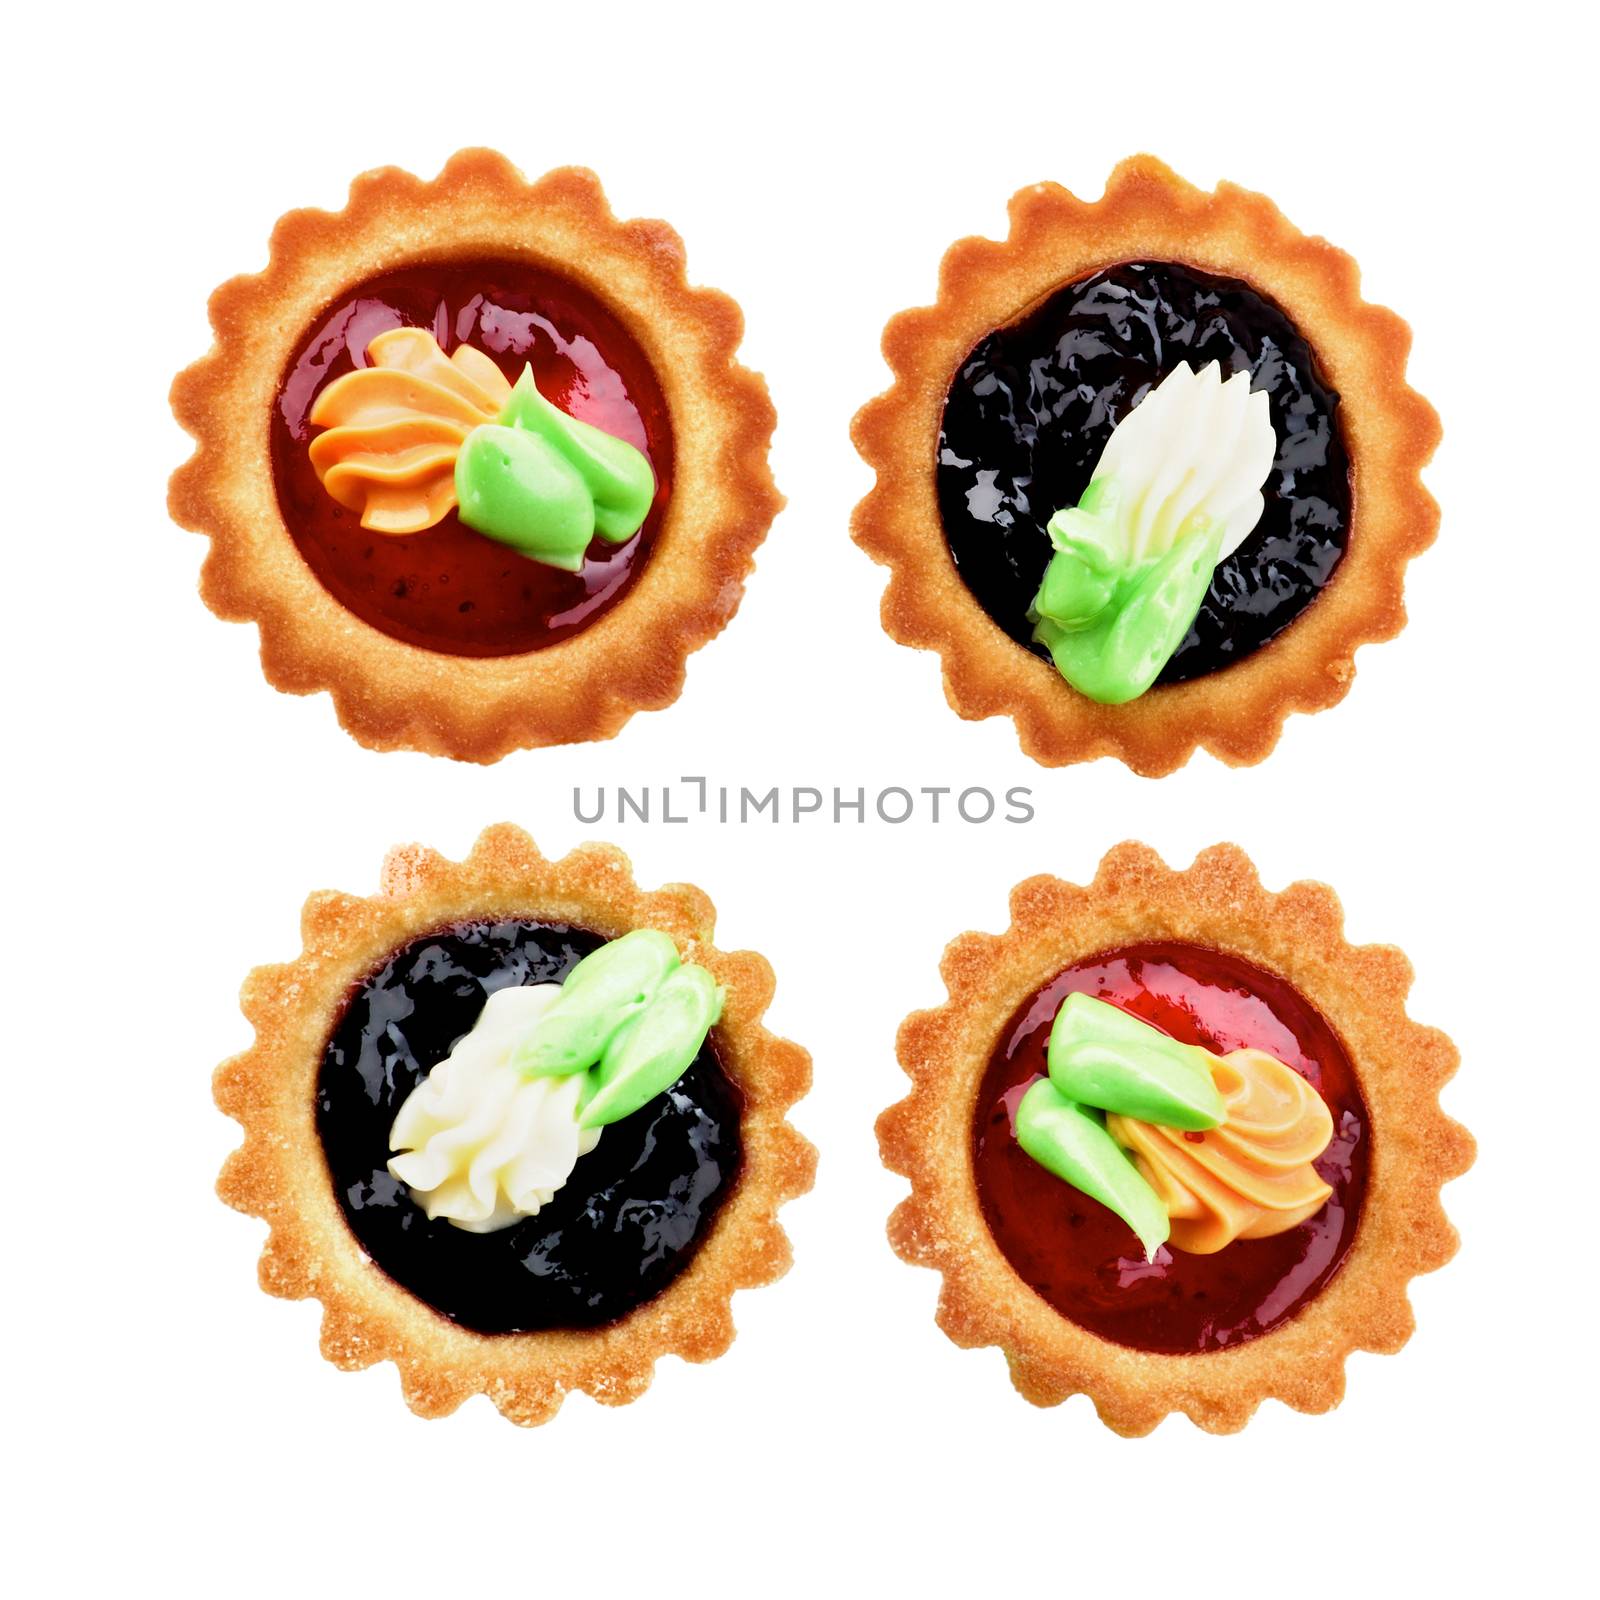 Arrangement of Delicious Little Tarts with Colored Butter Cream, Fruit Jam and Decoration closeup on White background. Top View